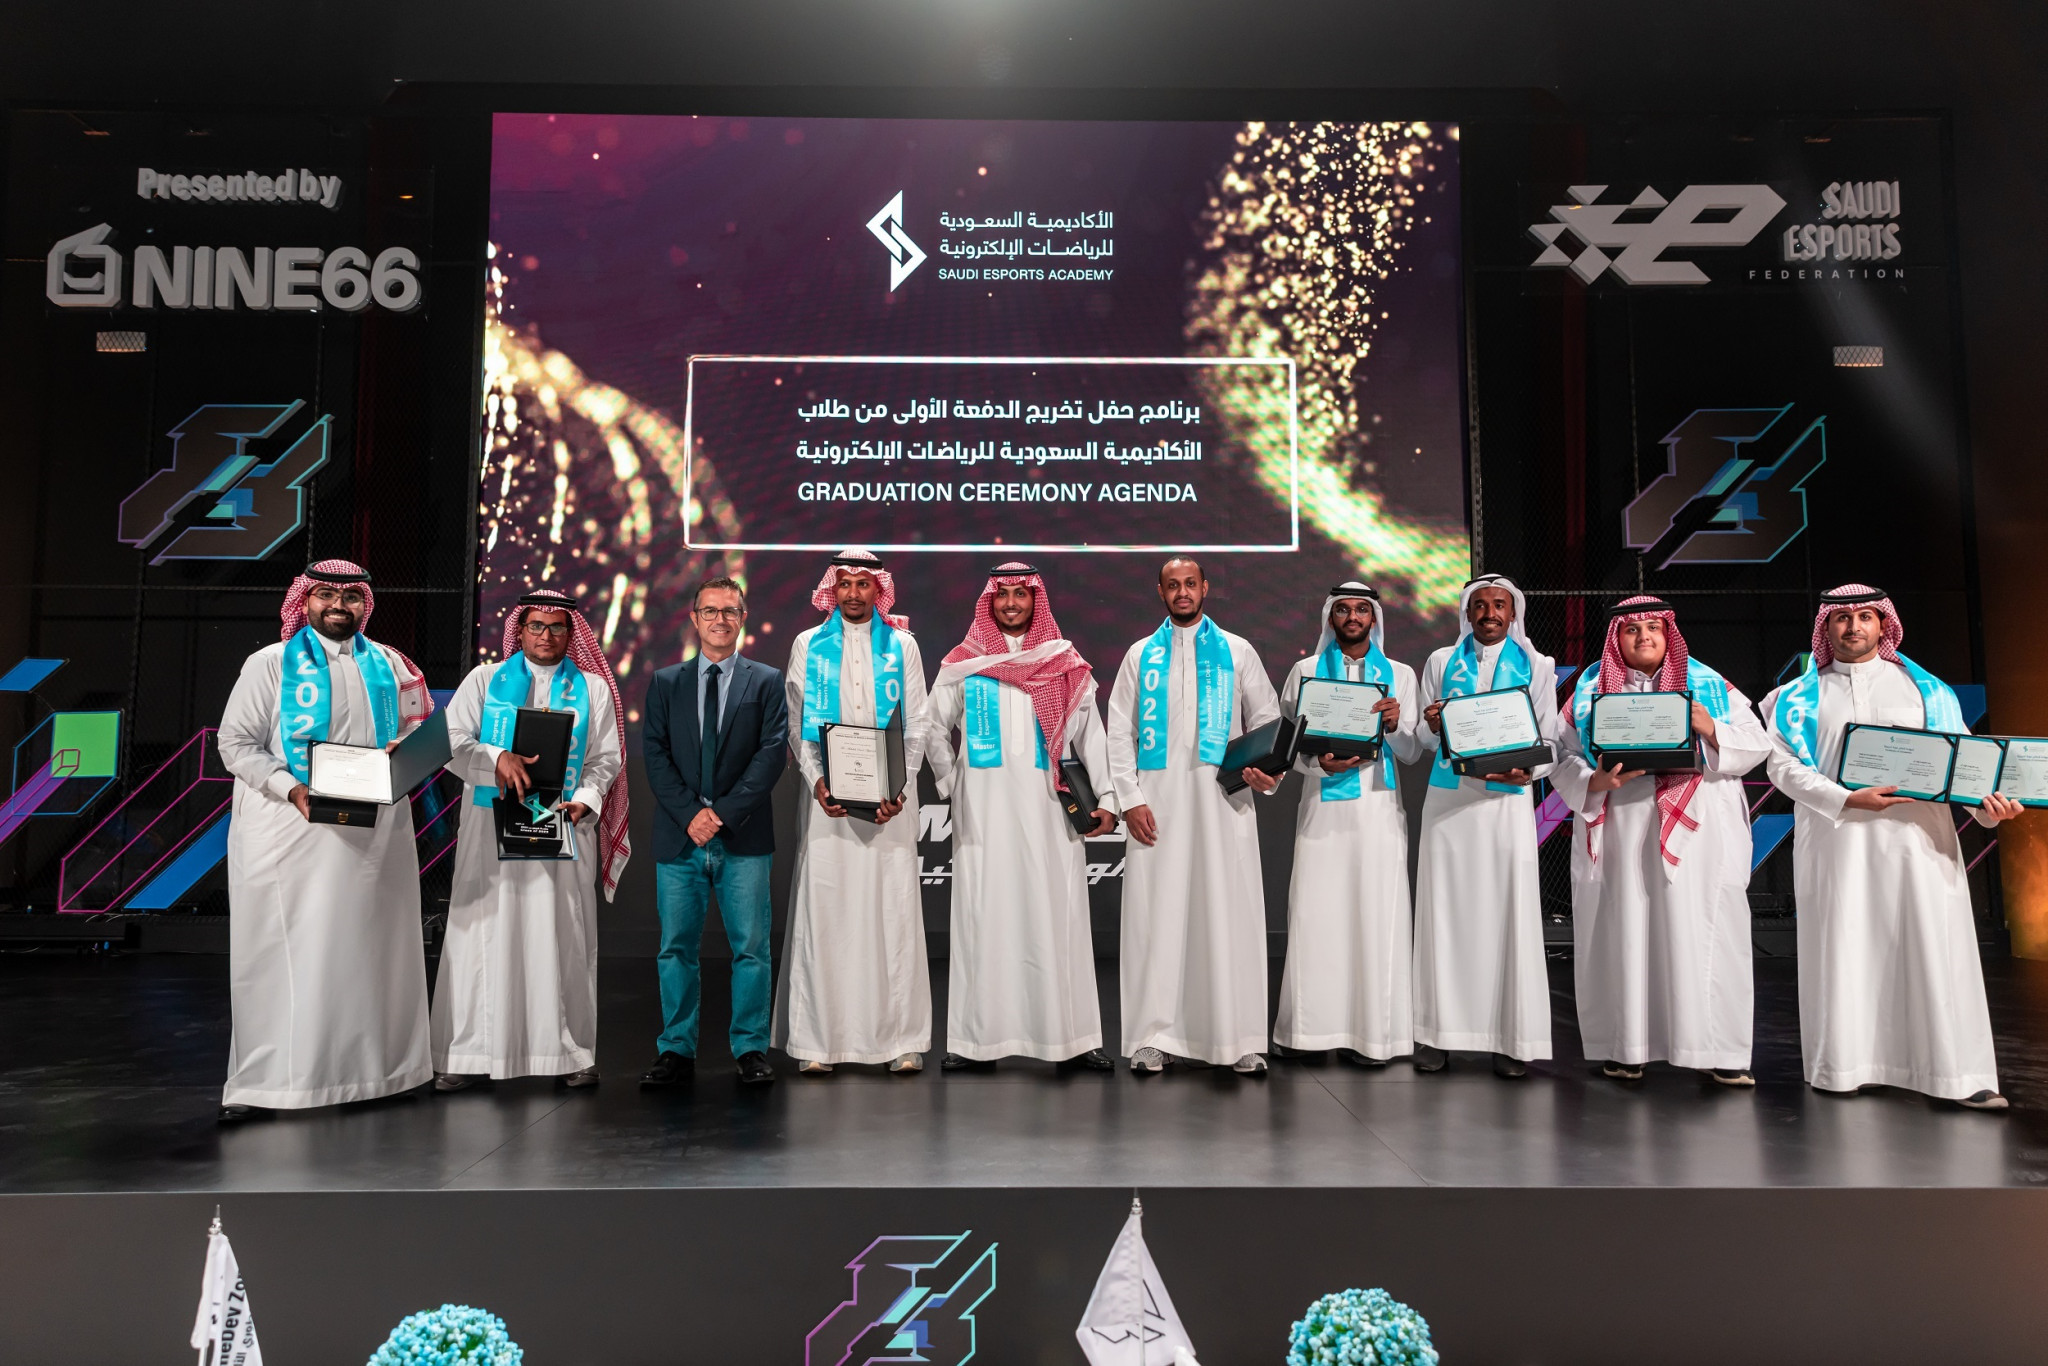 A total of 10 students graduated from the Saudi Esports Academy master’s degree in esports business ©Saudi Esports Academy